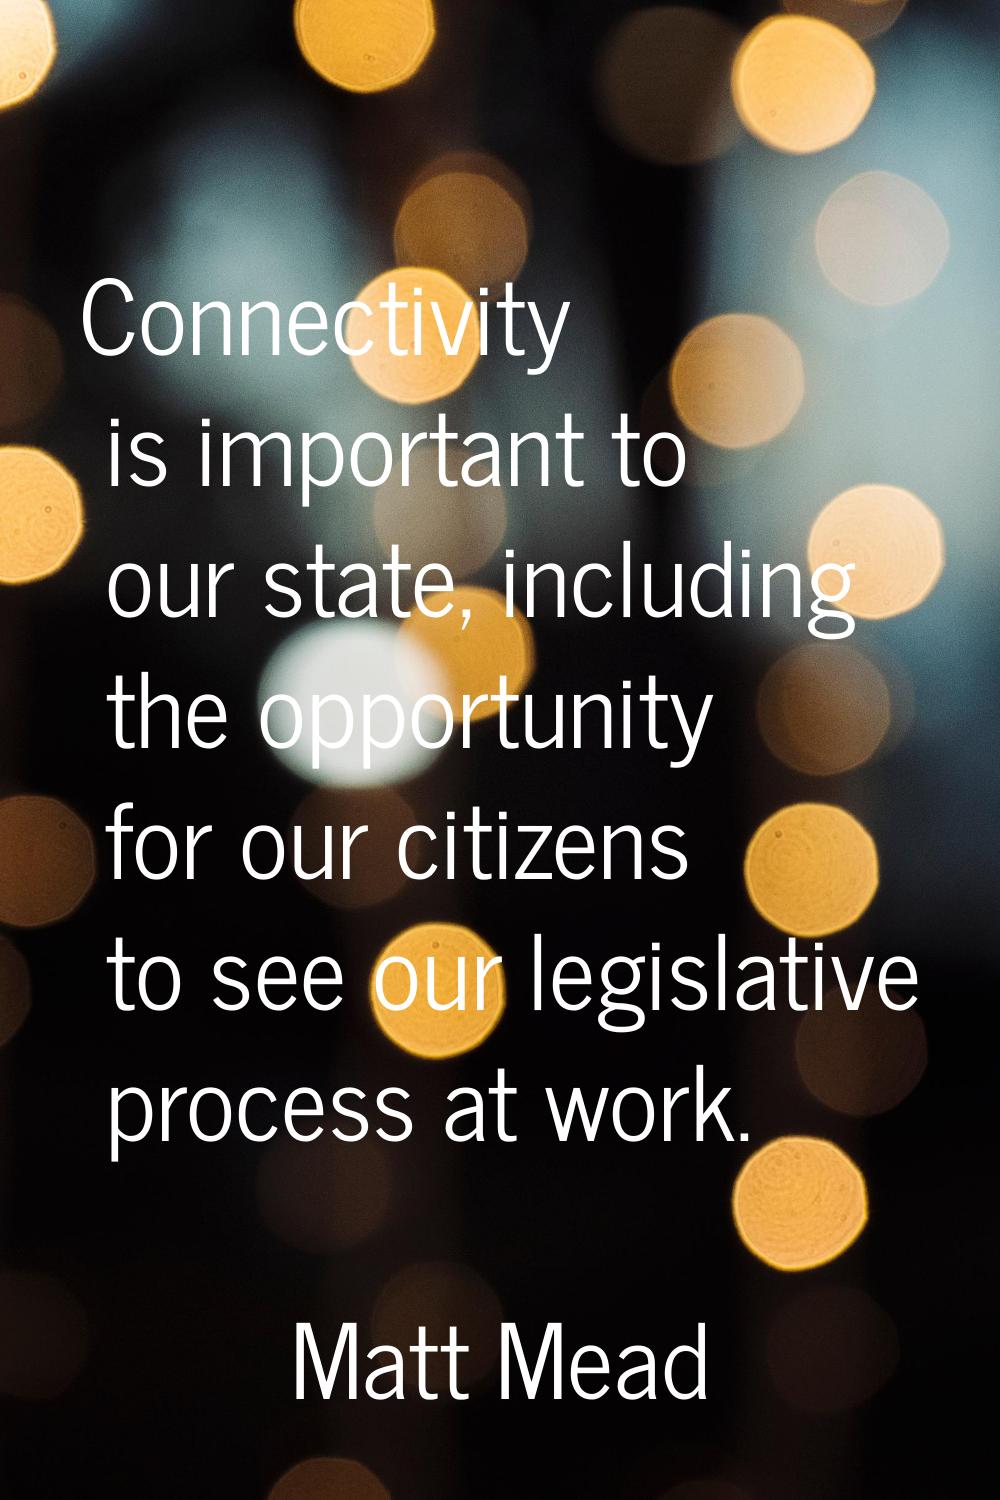 Connectivity is important to our state, including the opportunity for our citizens to see our legis